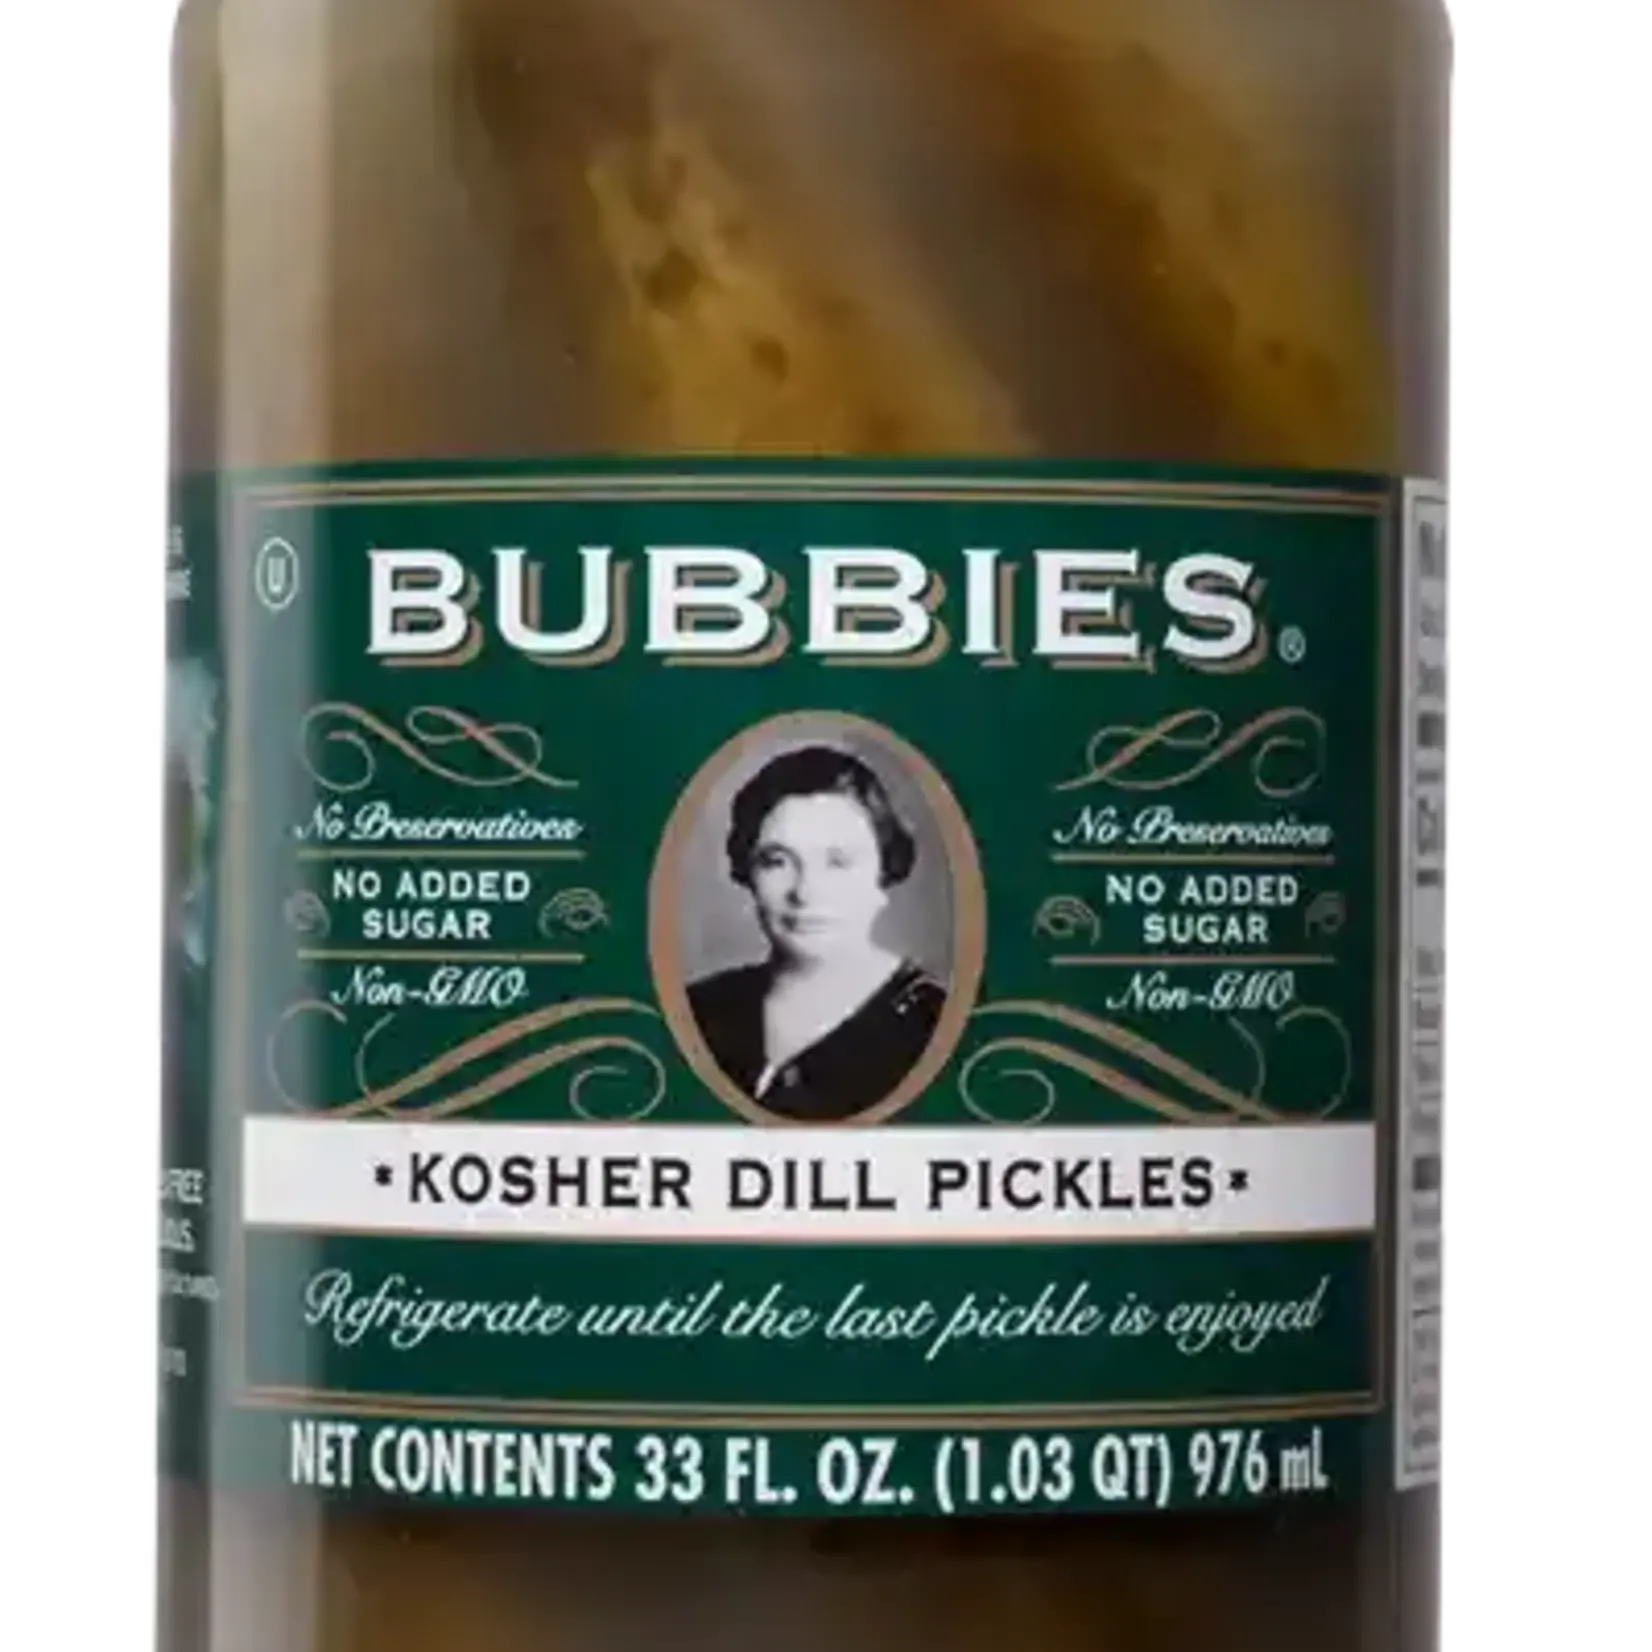 Bubbies Kosher Dill Pickles 1 litre